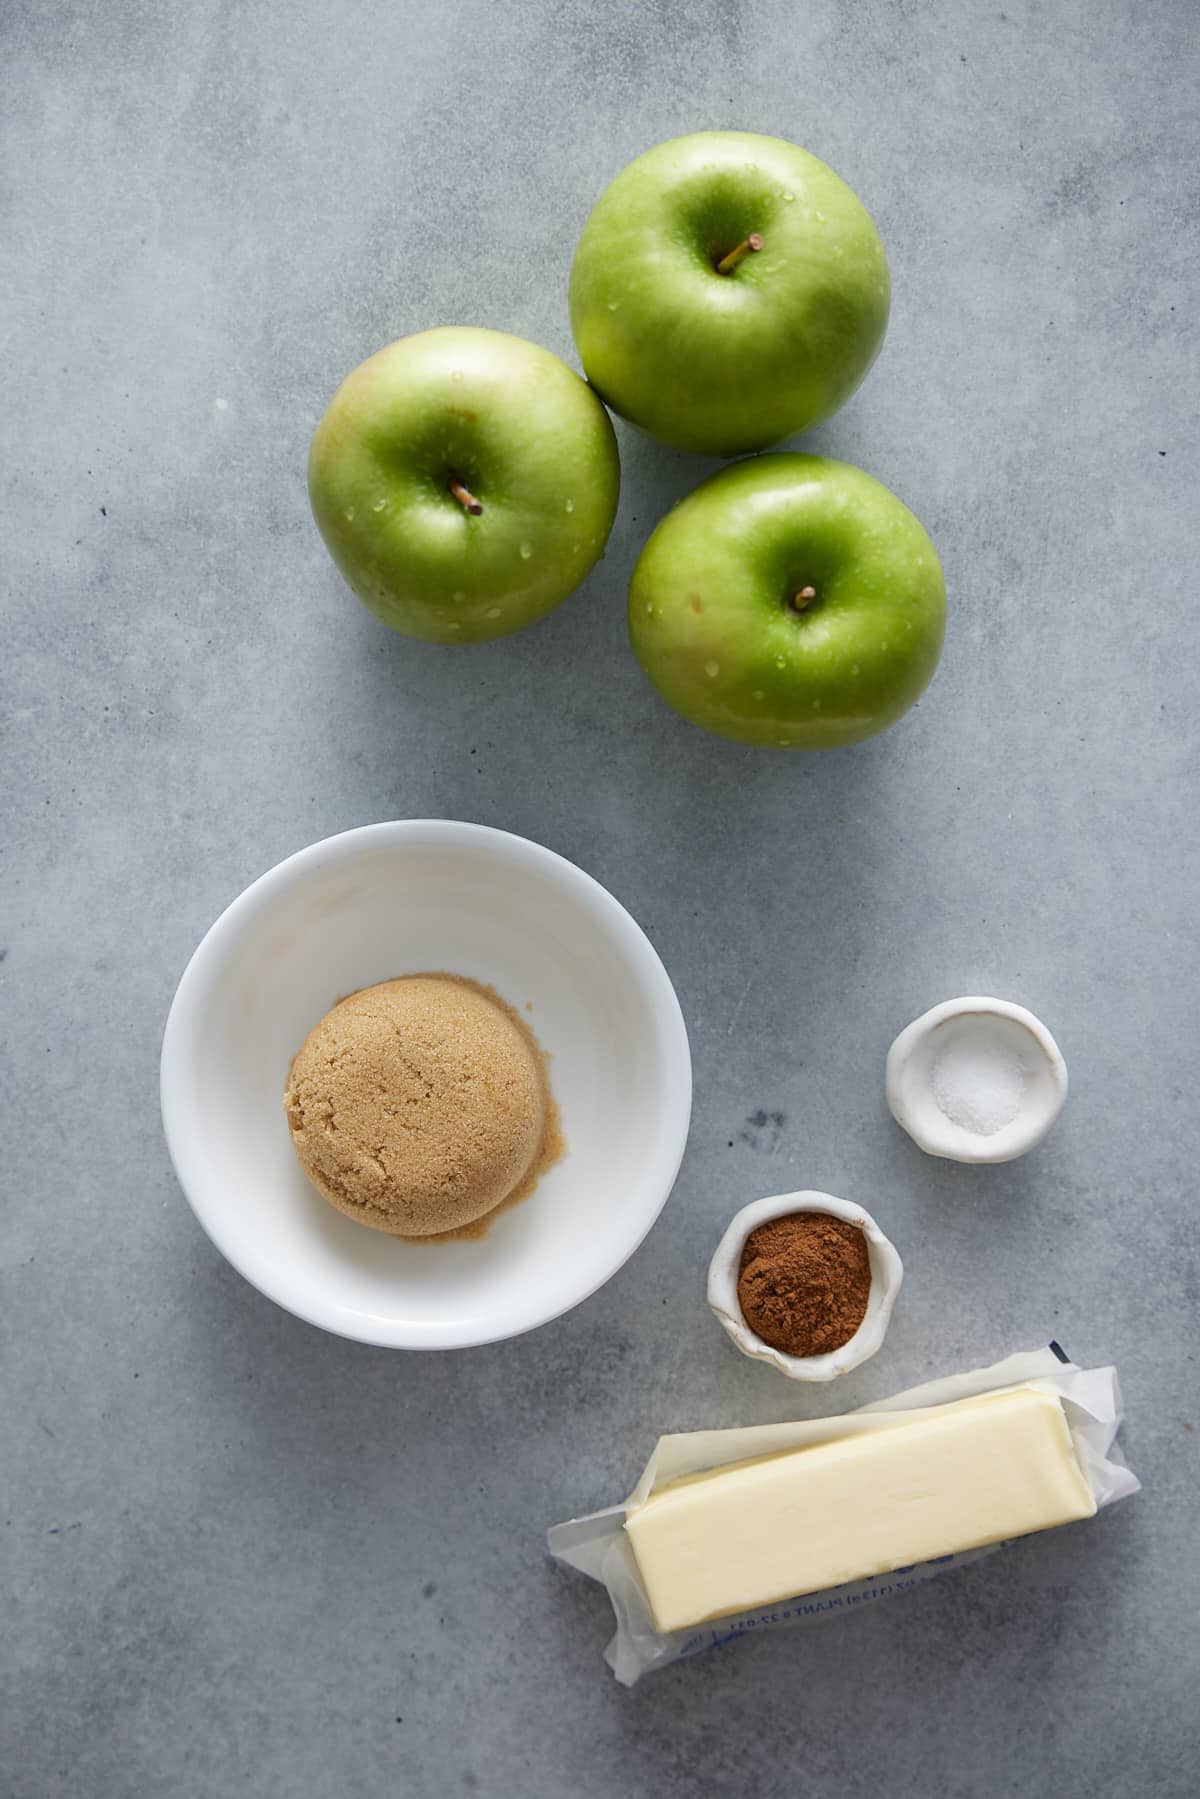 Recipe ingredients for Southern fried apples including 3 green apples and other ingredients set out in bowls on a marble surface